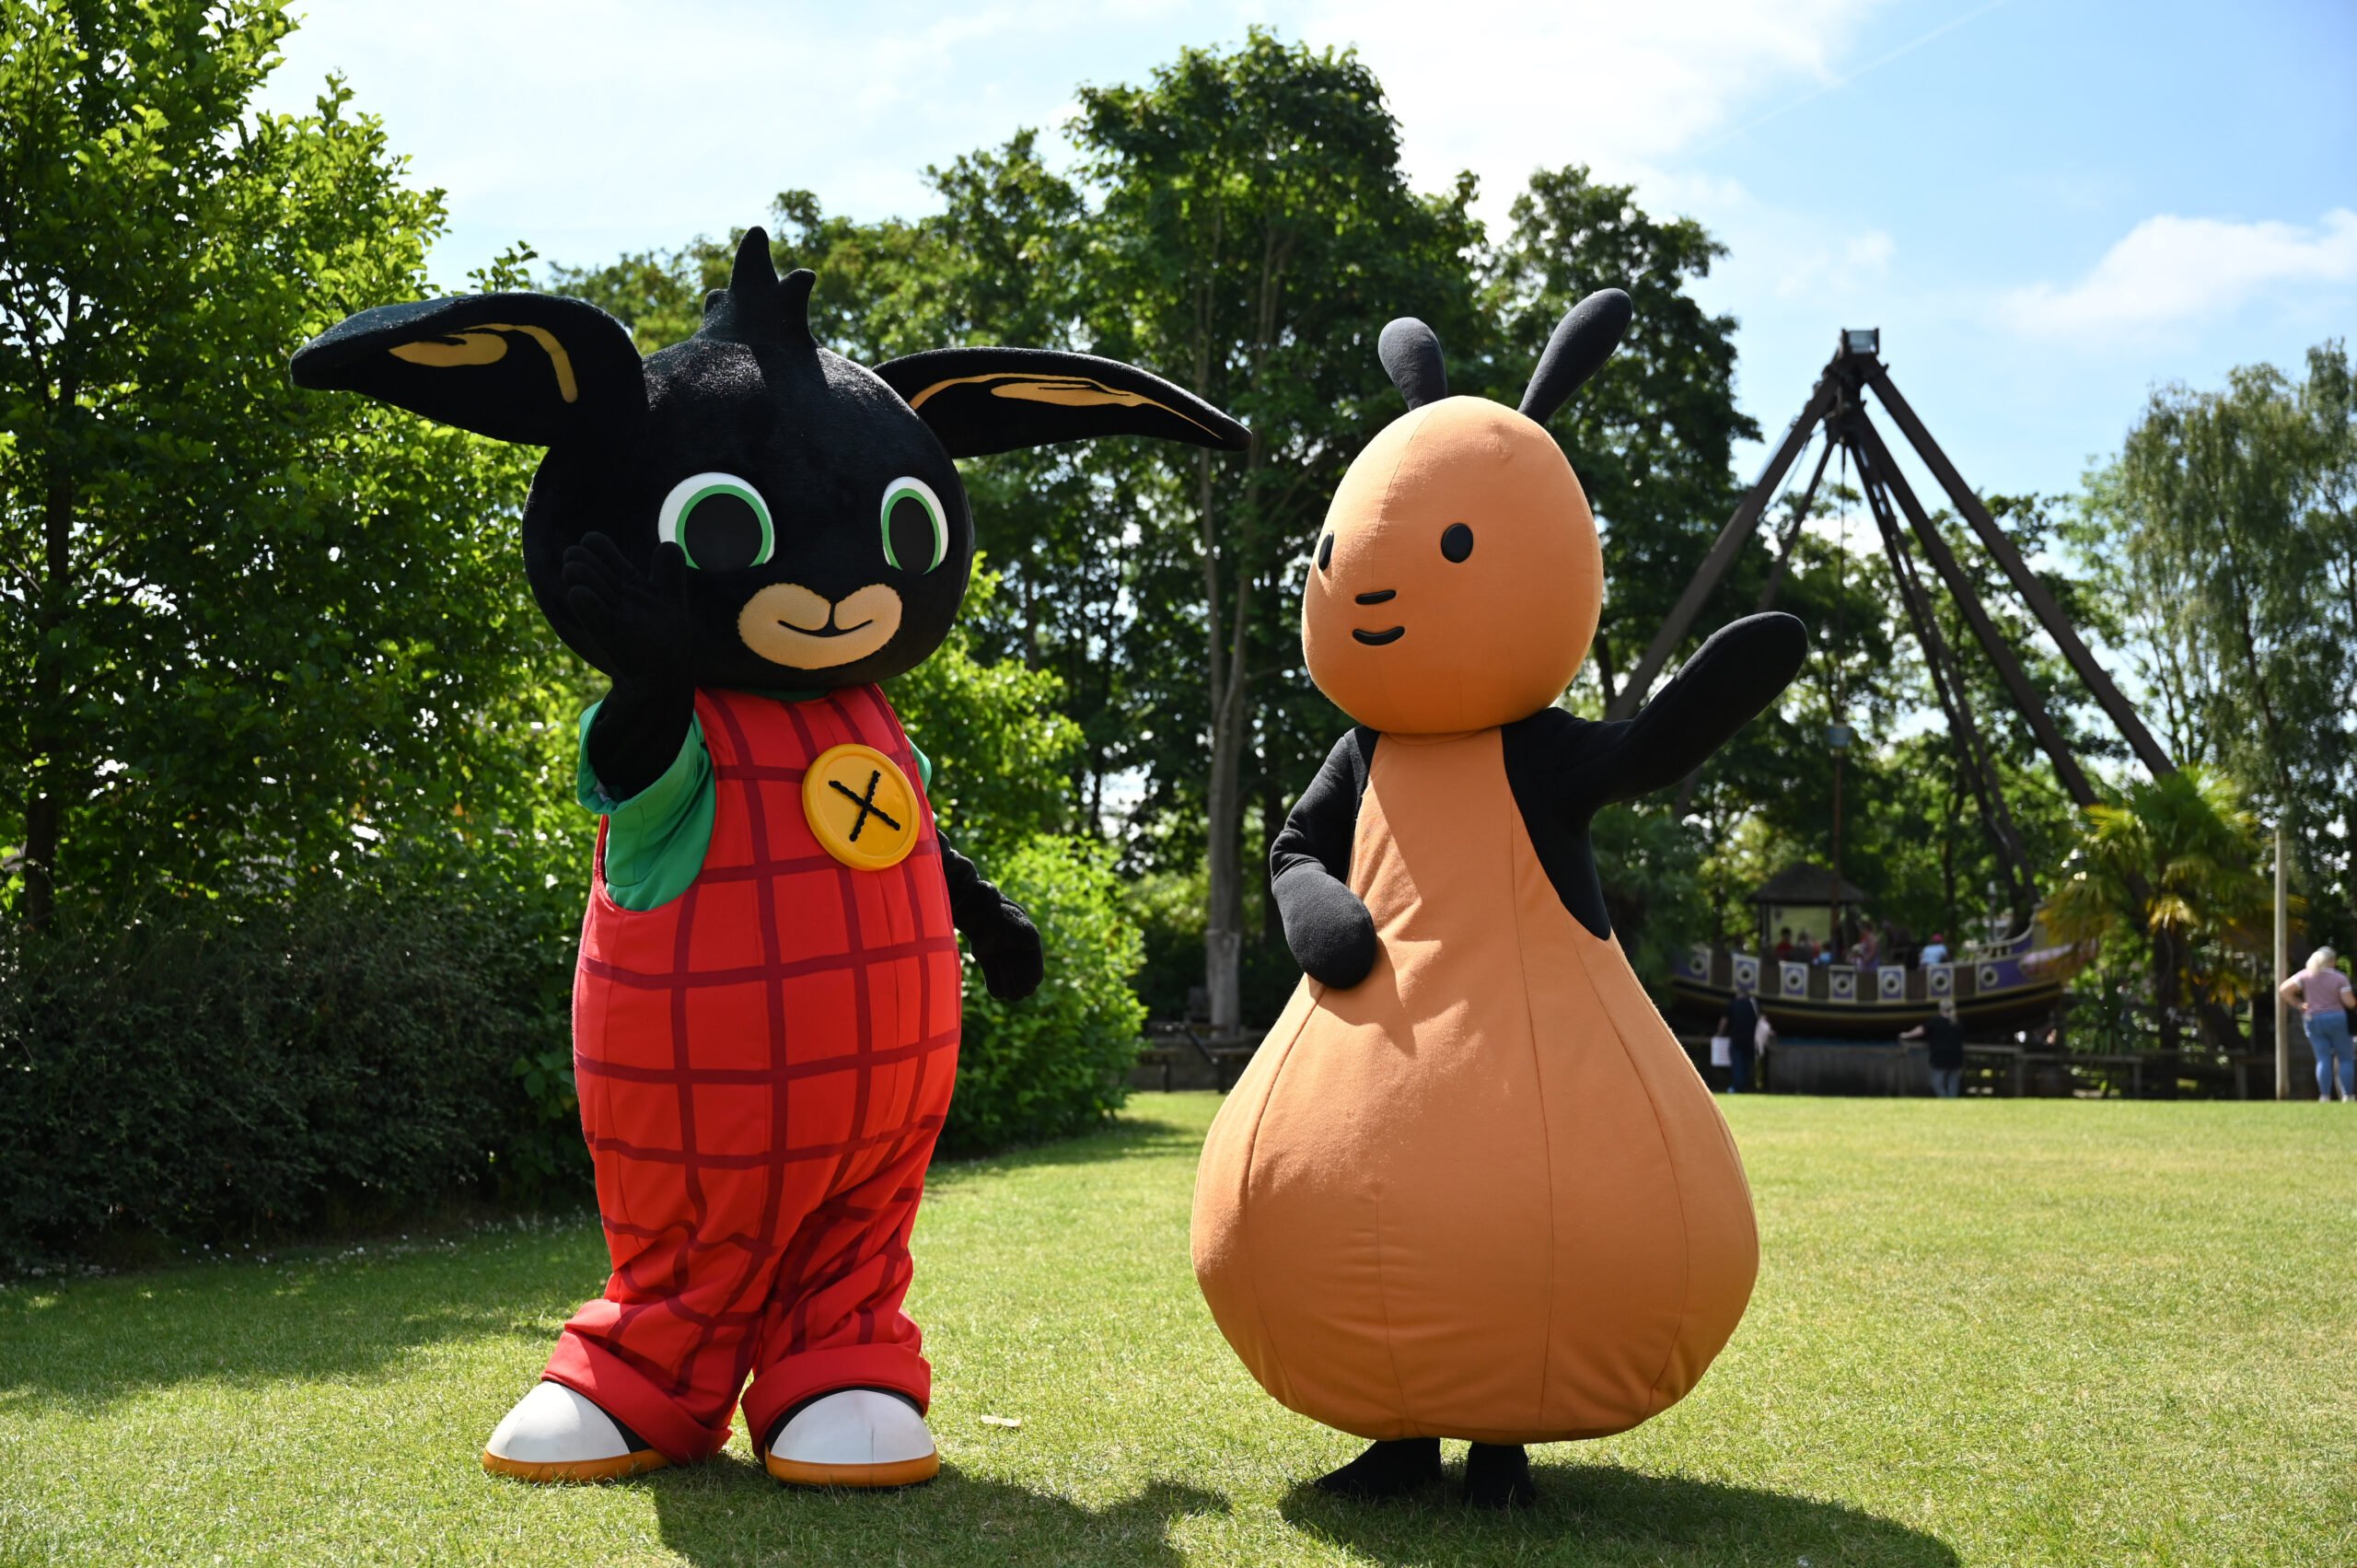 New Bing & Flop Live Show coming to Gulliver’s Land